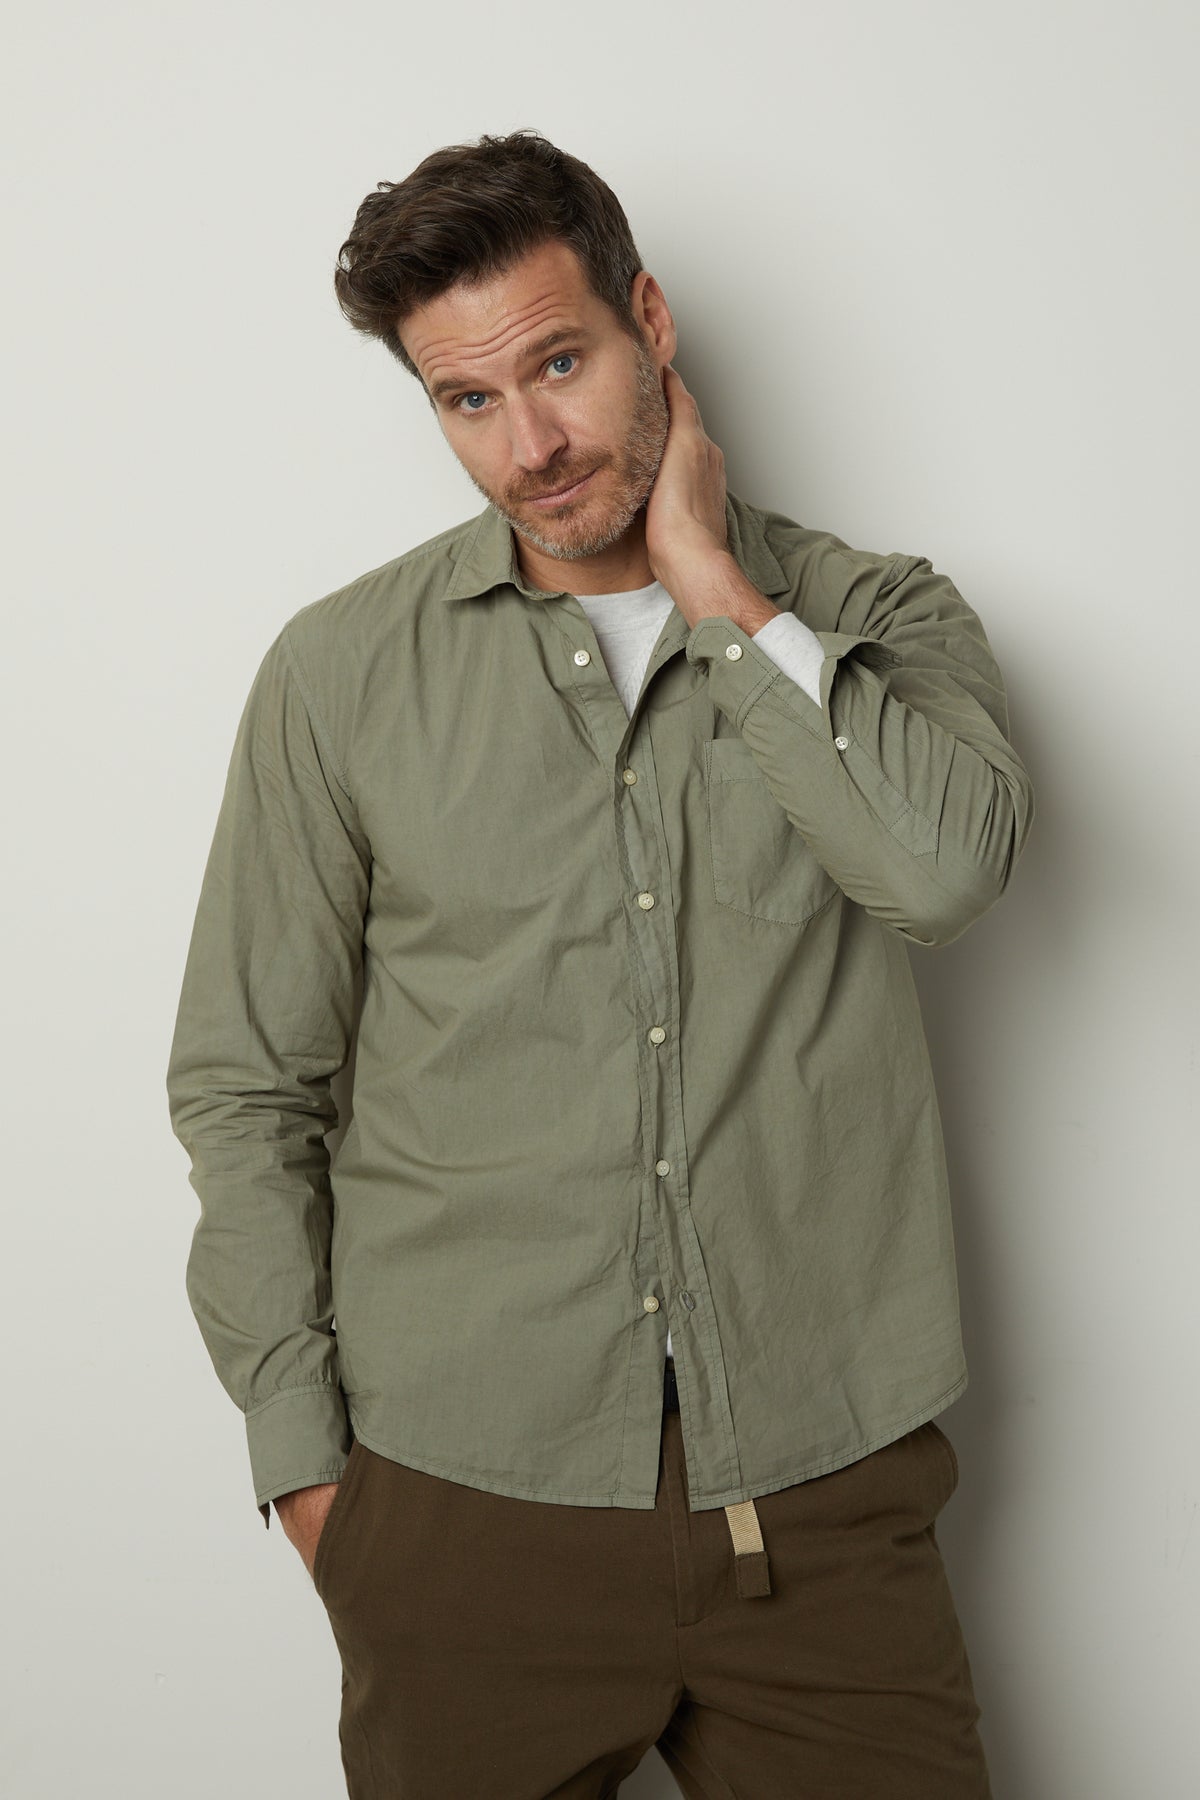 A man in a BROOKS BUTTON-UP SHIRT by Velvet by Graham & Spencer leaning against a wall.-35782370164929